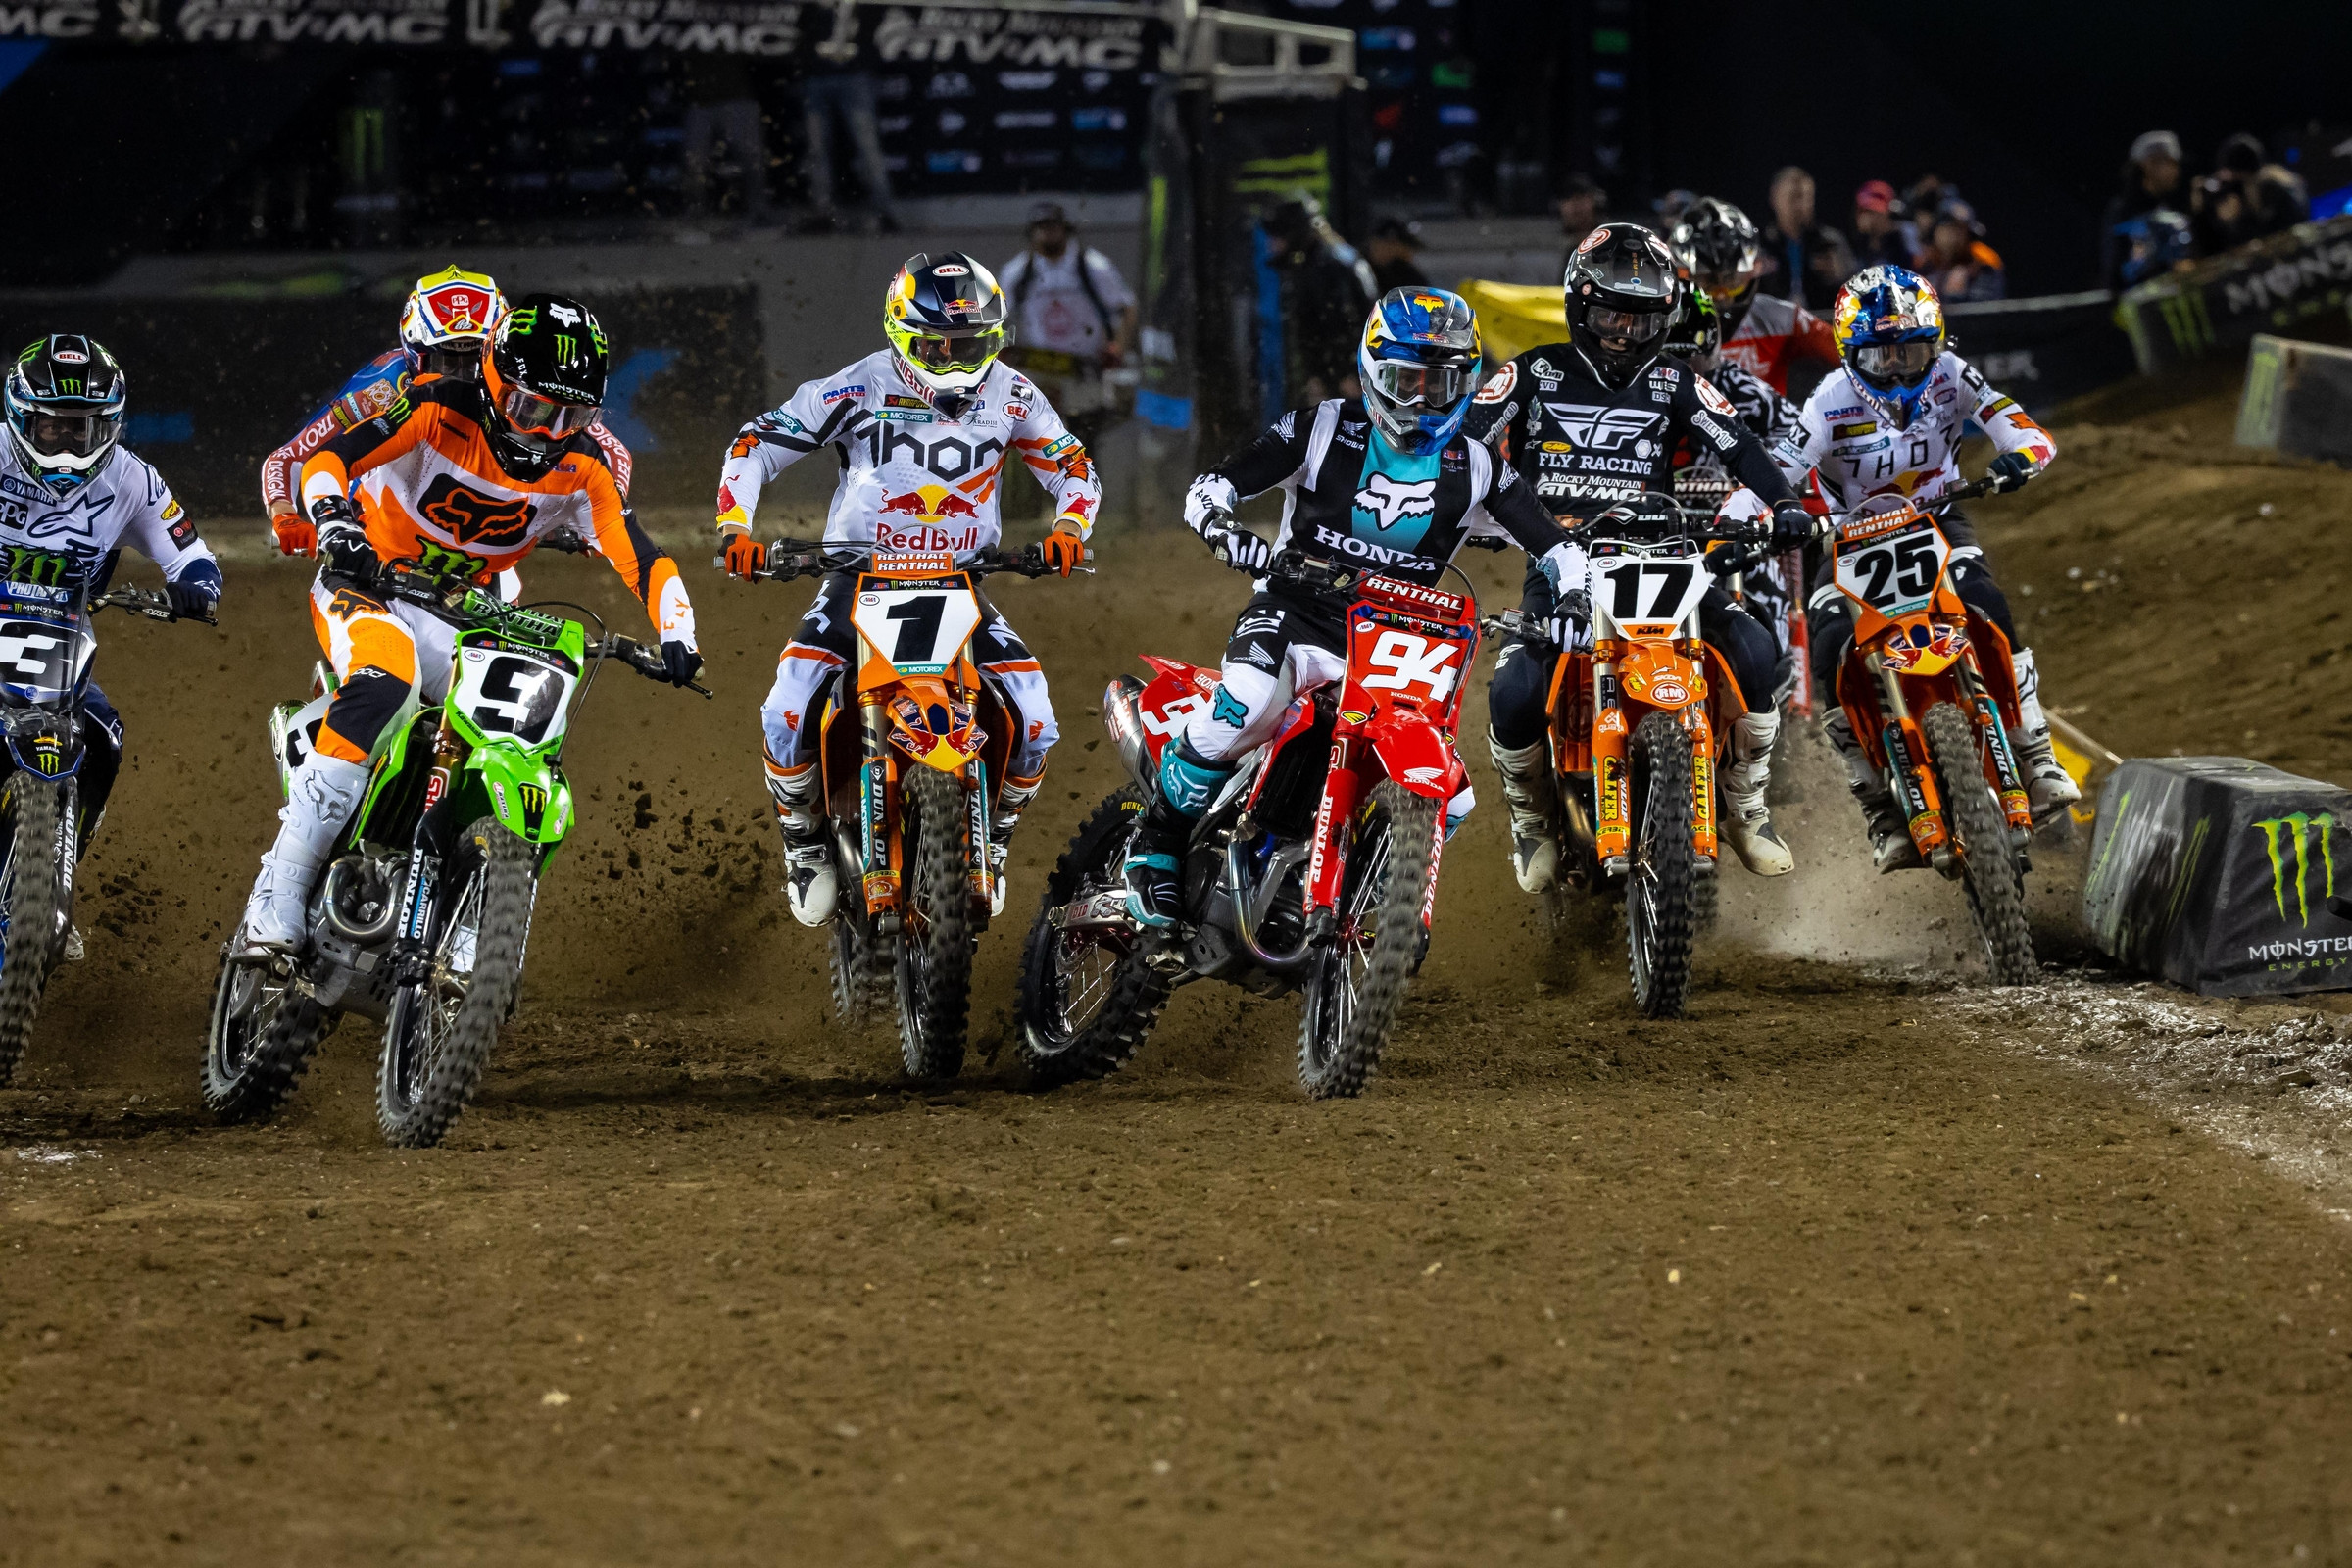 Race Report from the 2022 Oakland Supercross